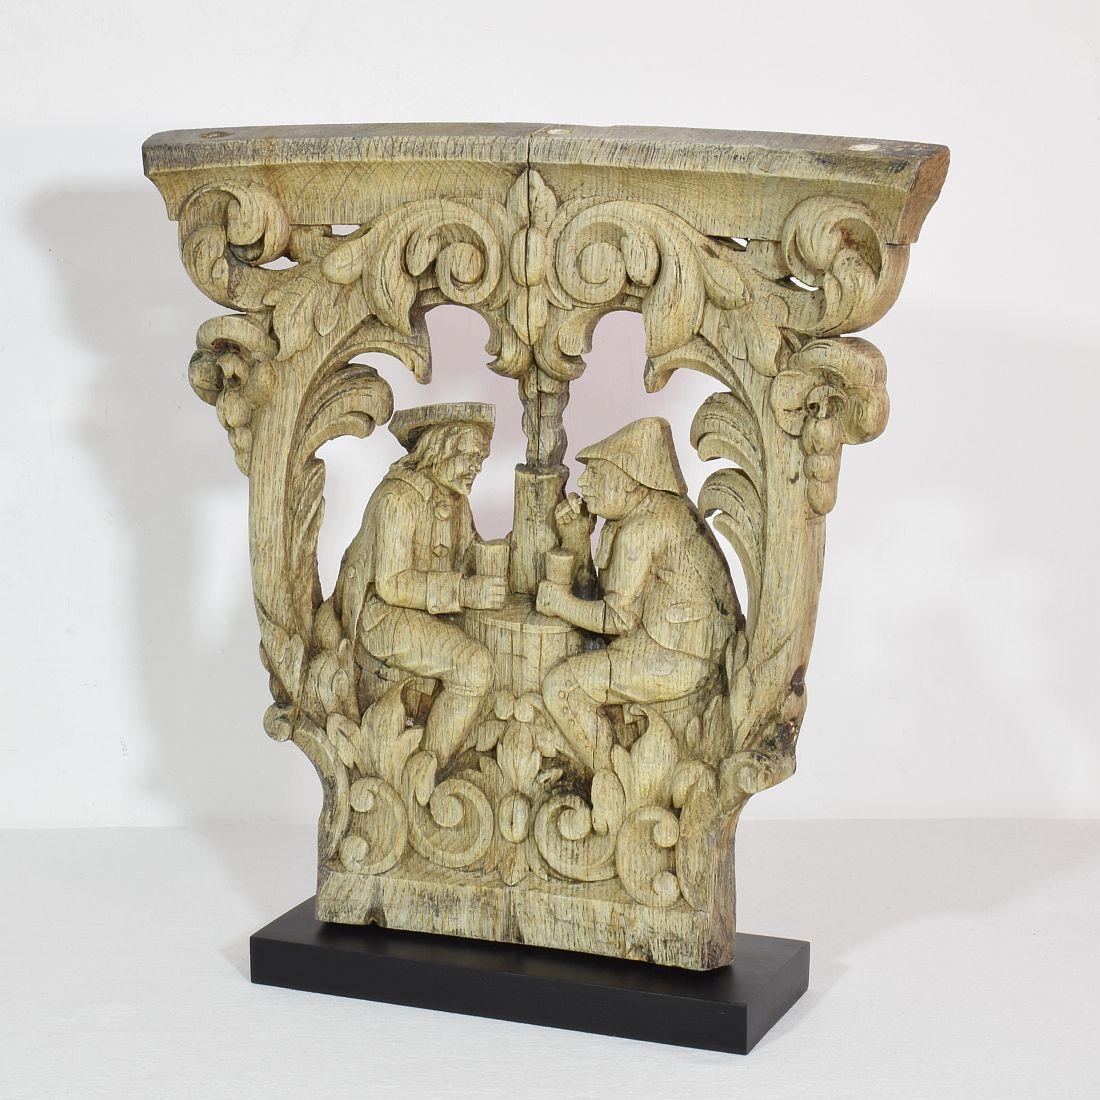 Beautiful weathered hand carved oak Capital with 2 figures, France 18/19th century. Weathered and old repairs.
Measurement includes the wooden base.